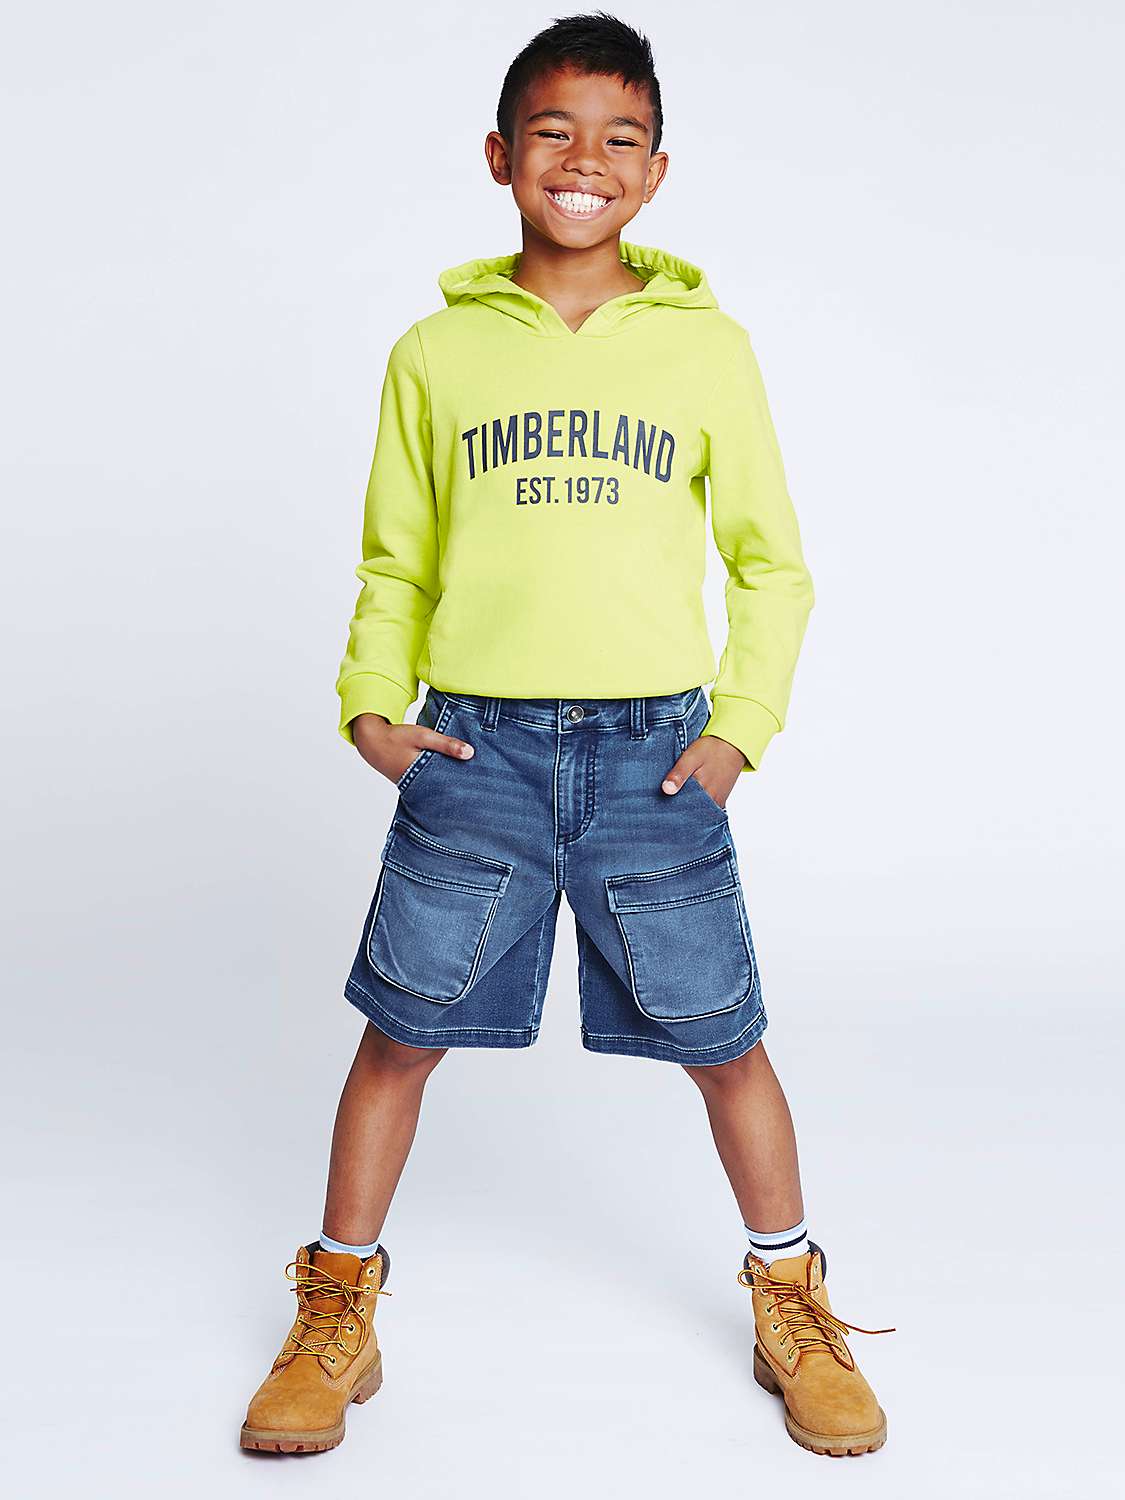 Buy Timberland Kids' Logo Embroidered Hoodie, Yellow/Multi Online at johnlewis.com